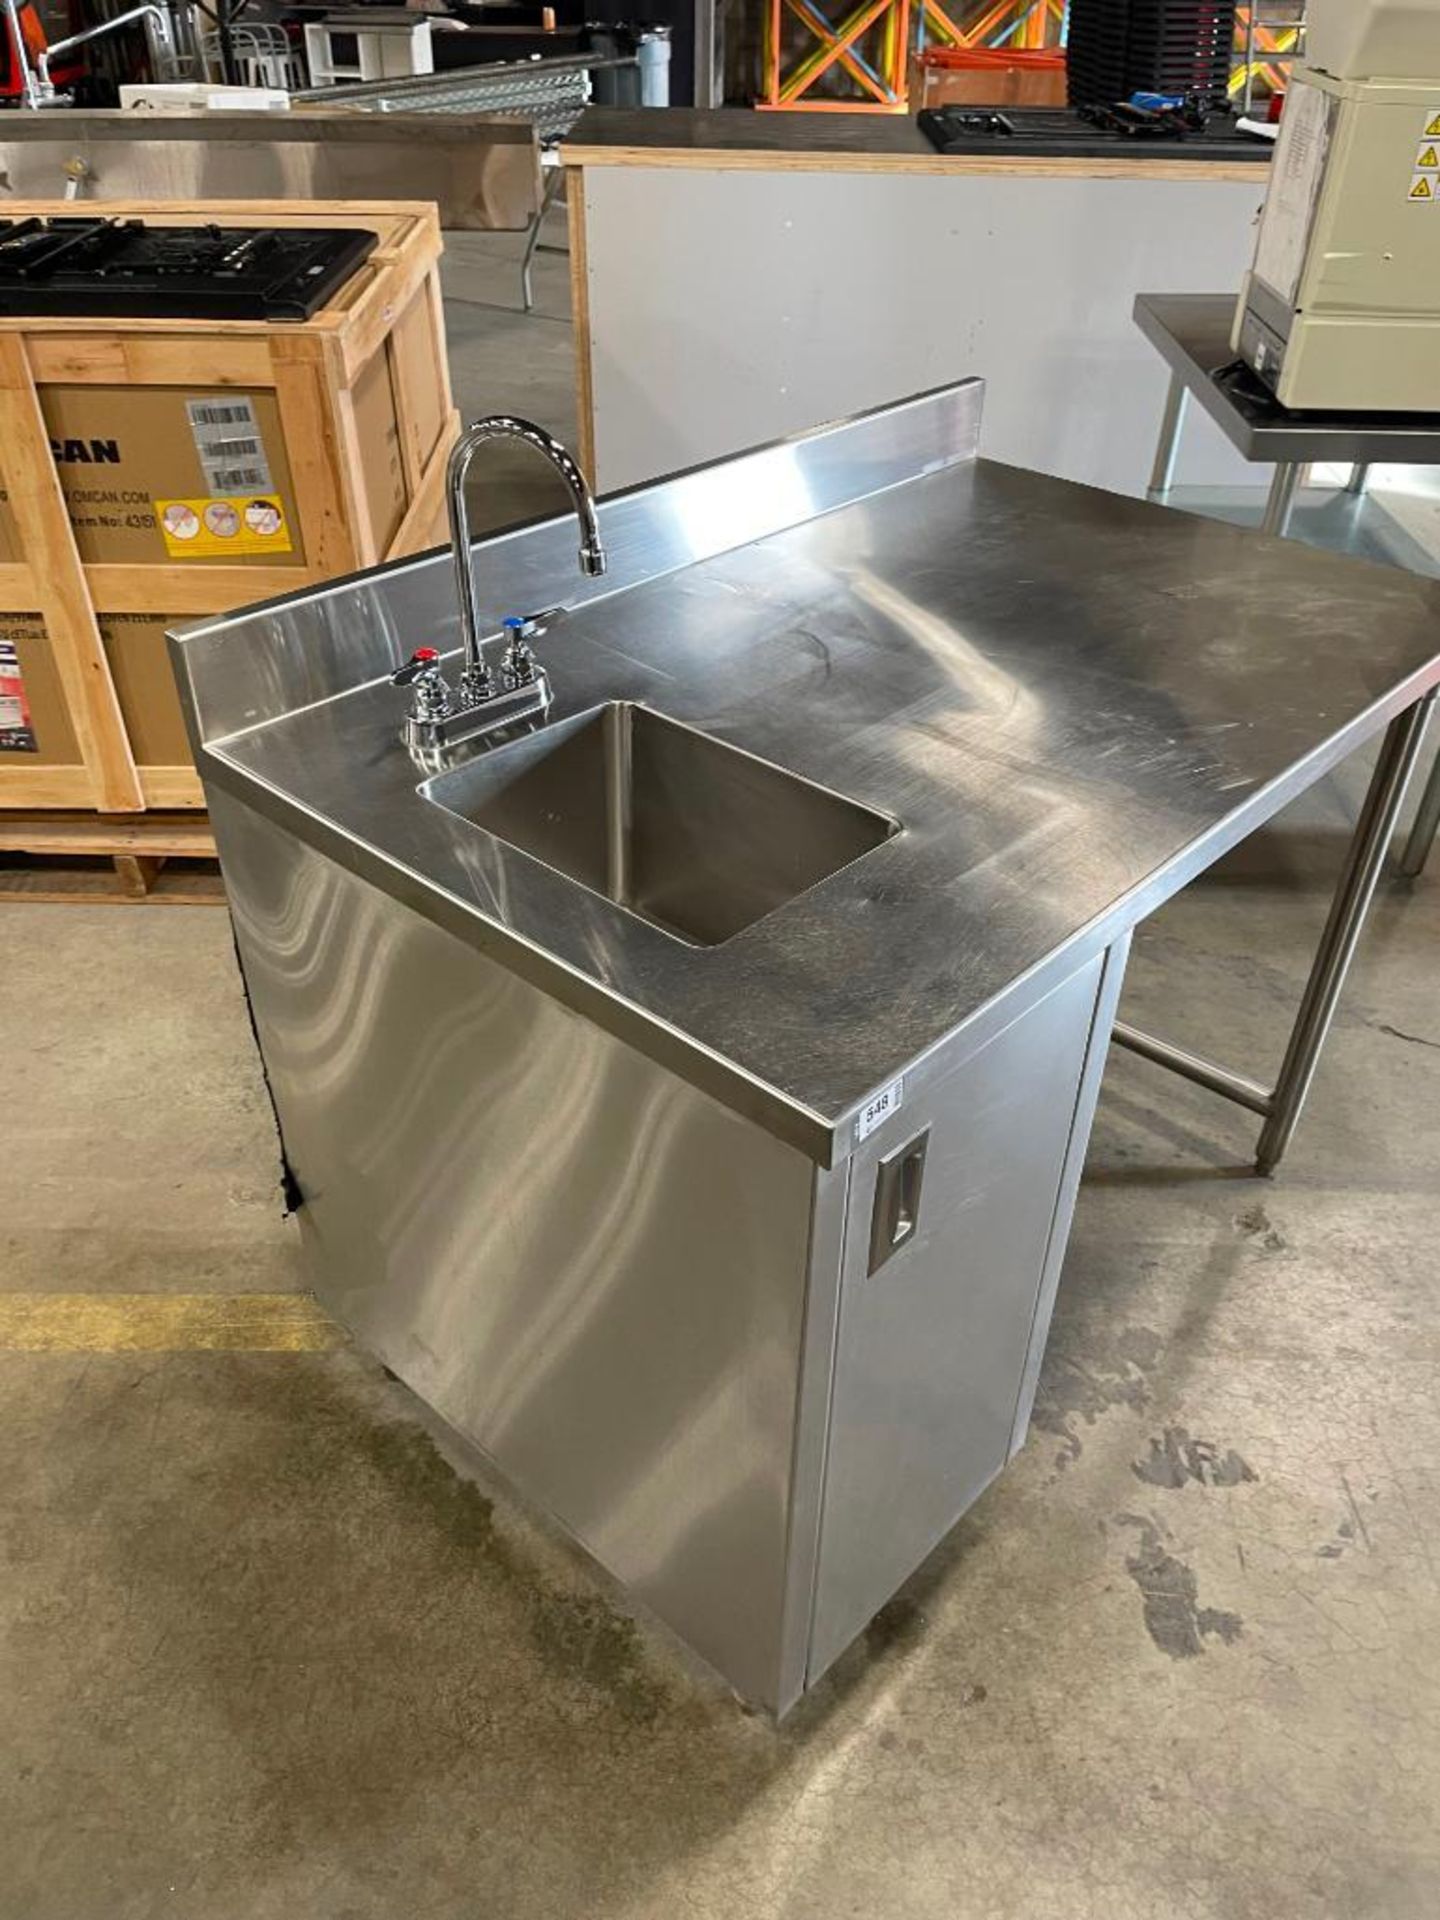 48" STAINLESS STEEL WORK TABLE WITH SINGLE WELL SINK - Image 3 of 11